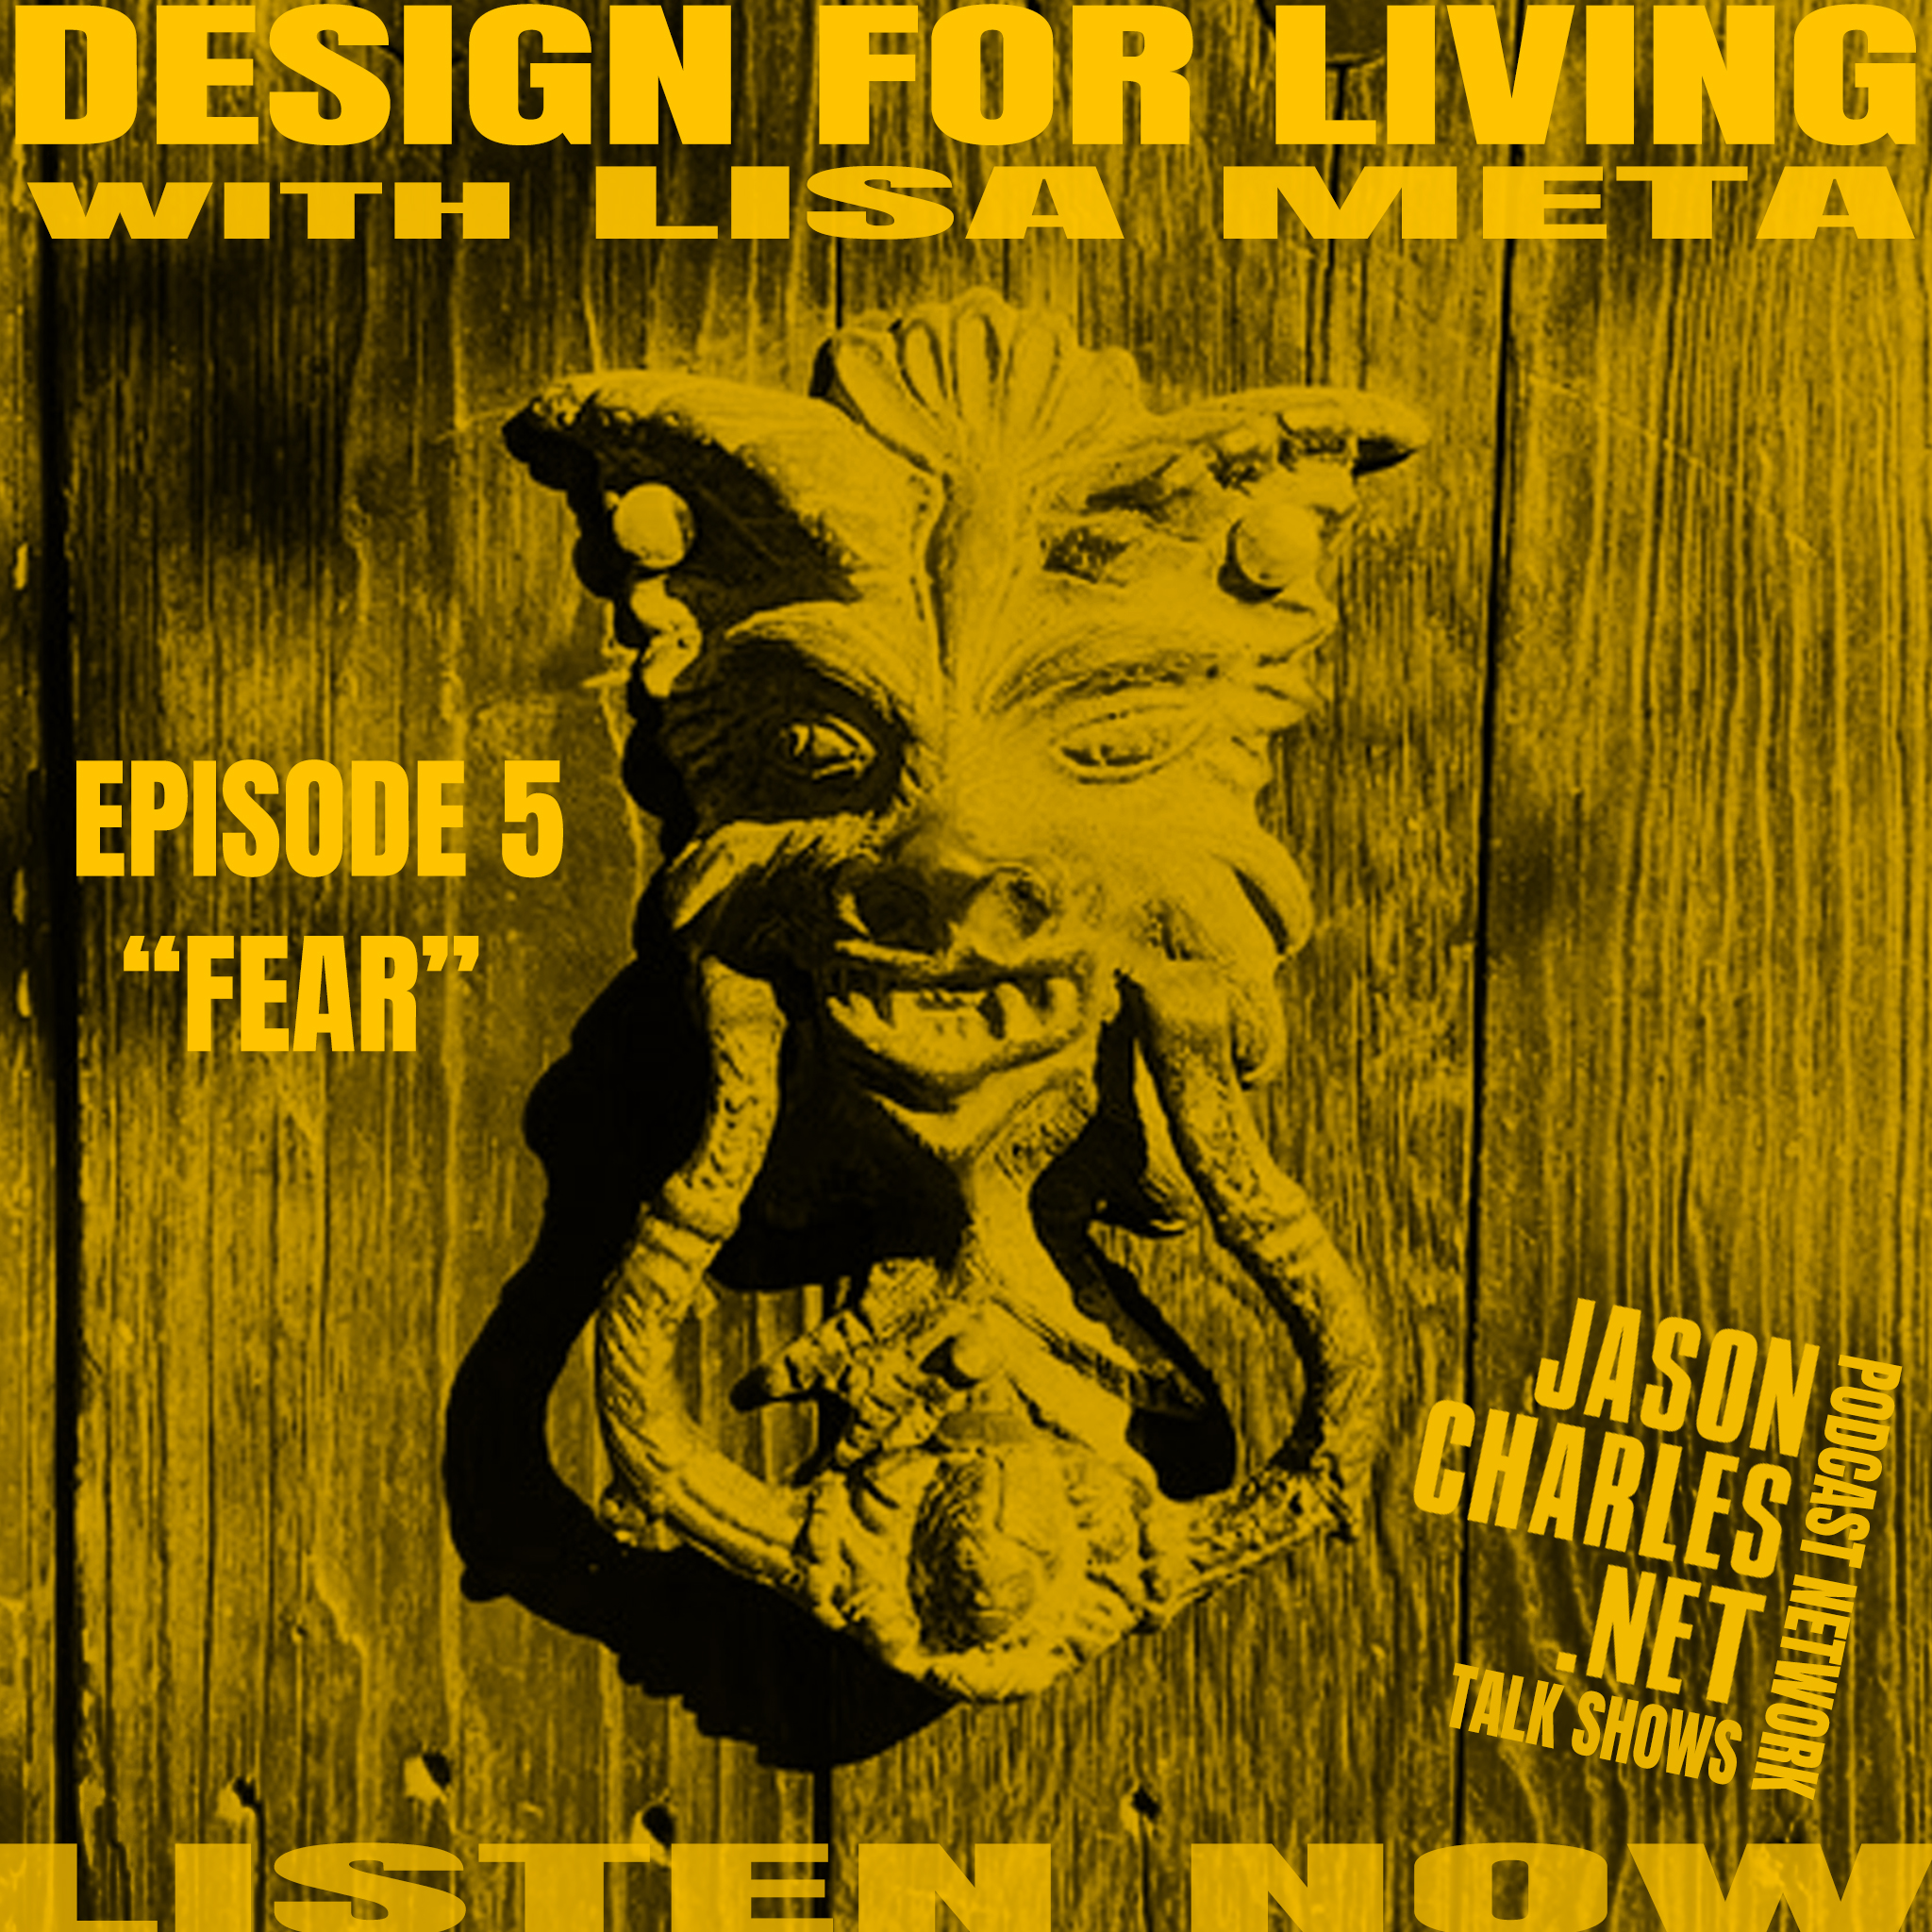 DESIGN FOR LIVING with Lisa Meta Episode 5 FEAR